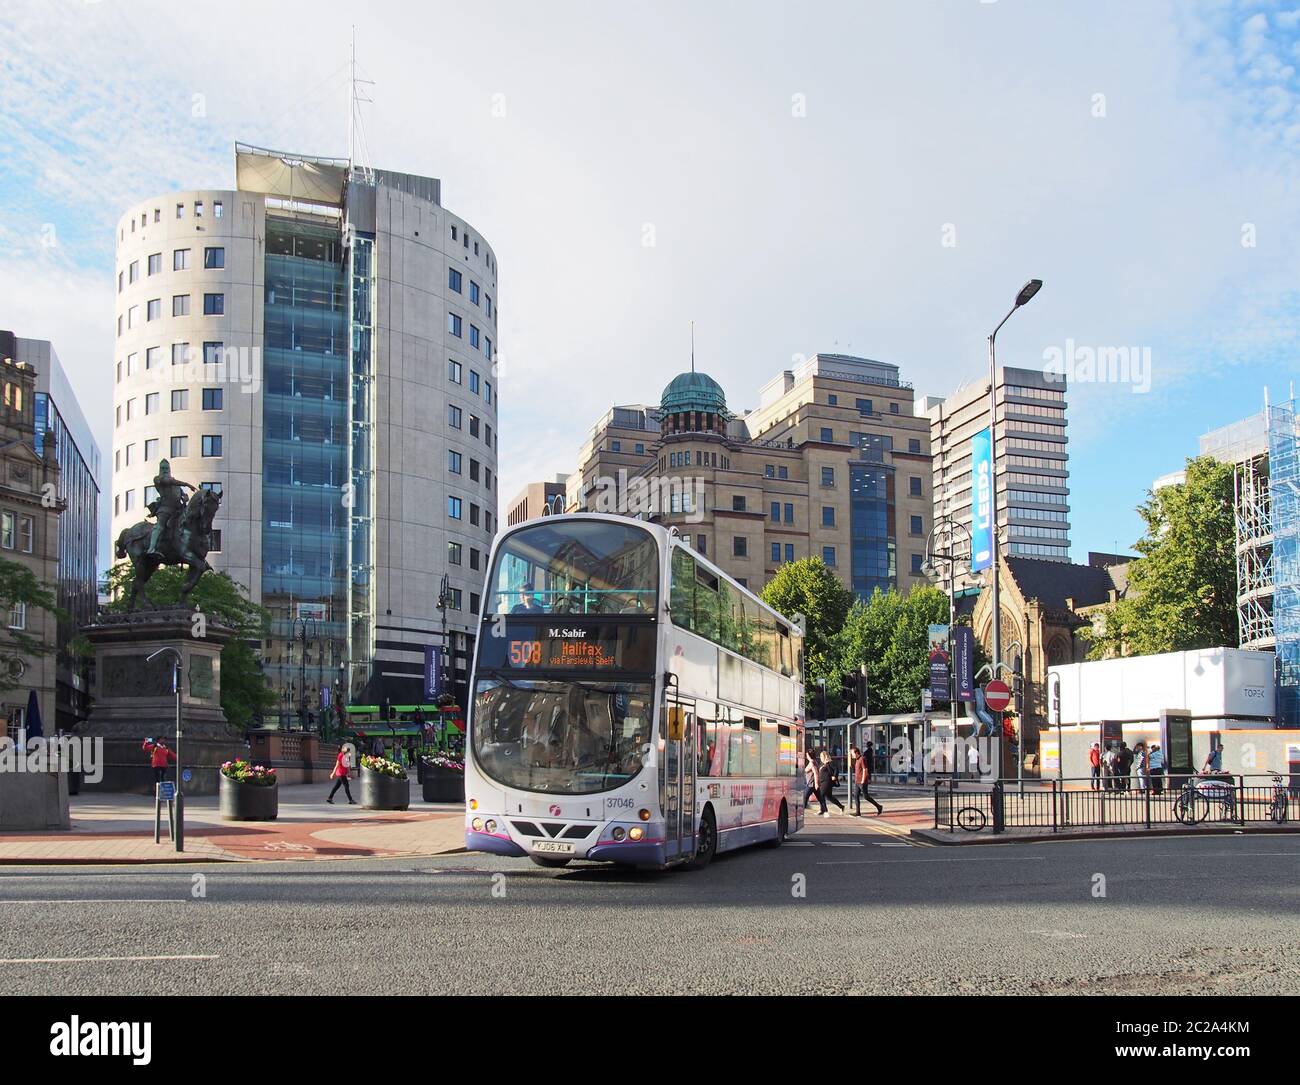 a bus in city square in leeds west yorkshire with people walking past city buildings and monuments in bright summer sunshine Stock Photo